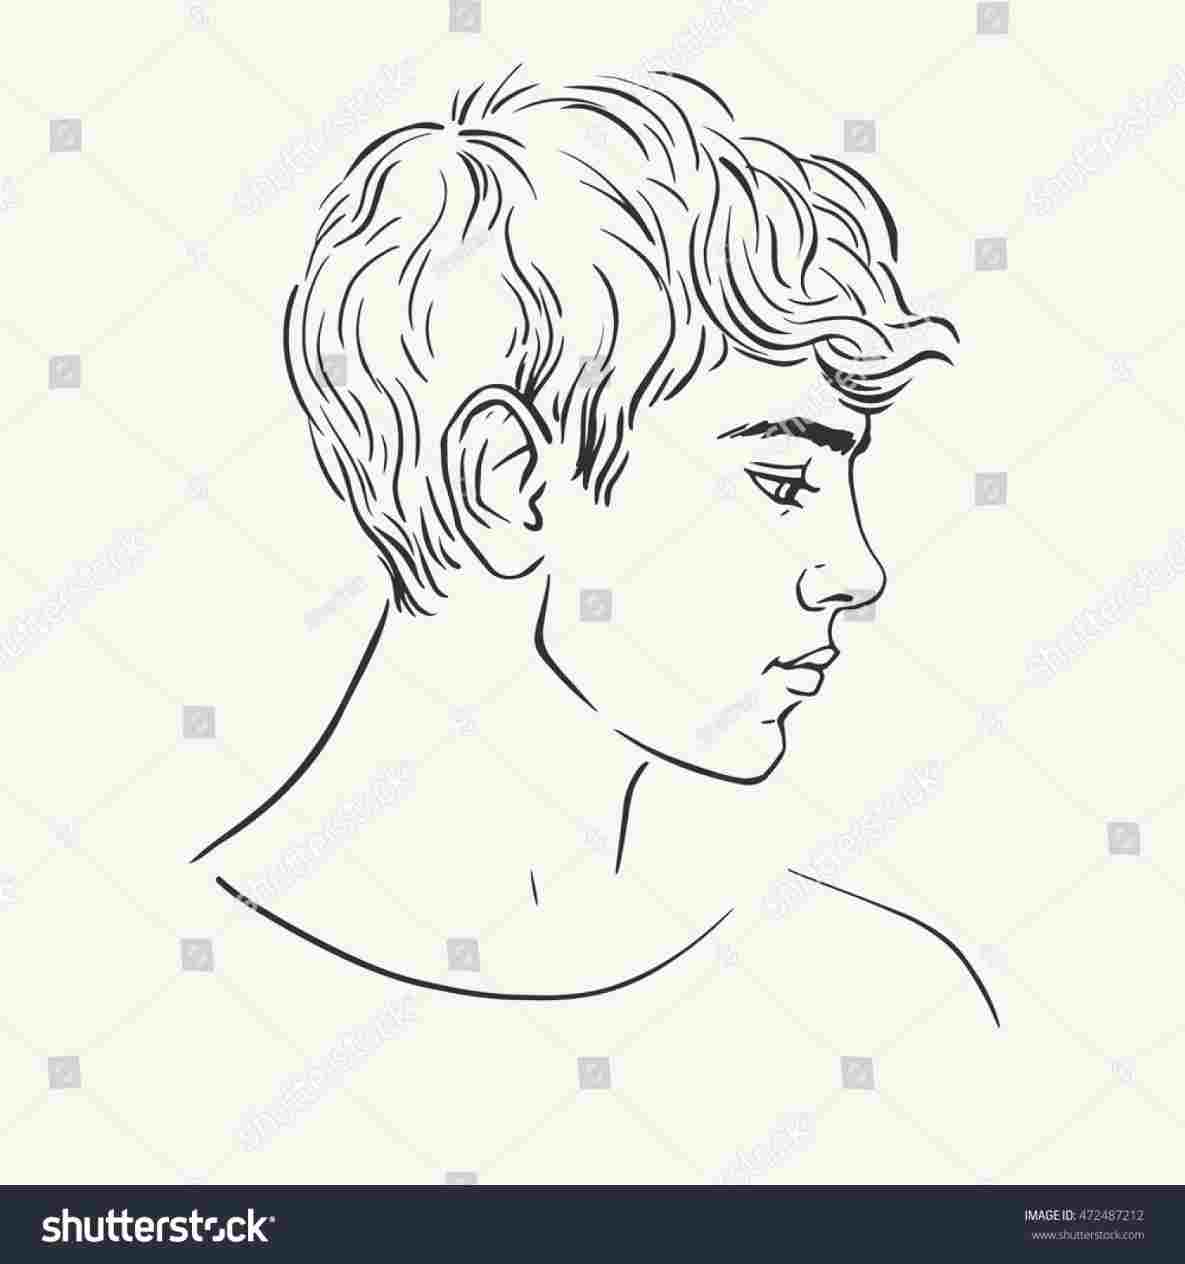 How To Draw A Mans Face From The Side